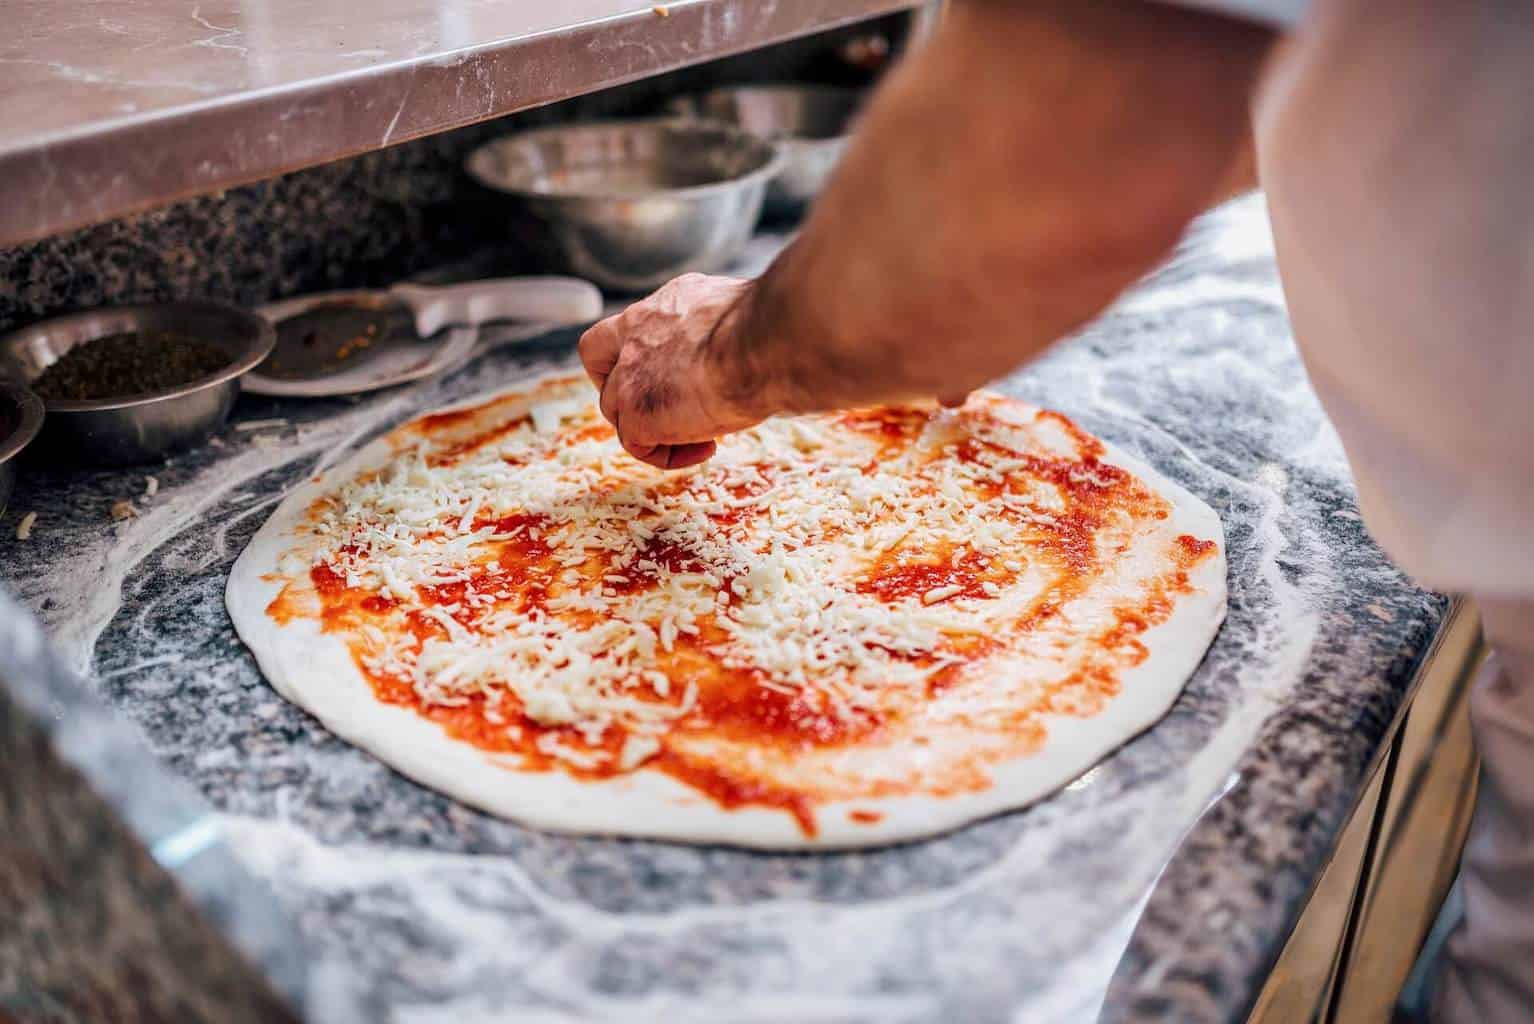 Chef adding cheese on a pizza base